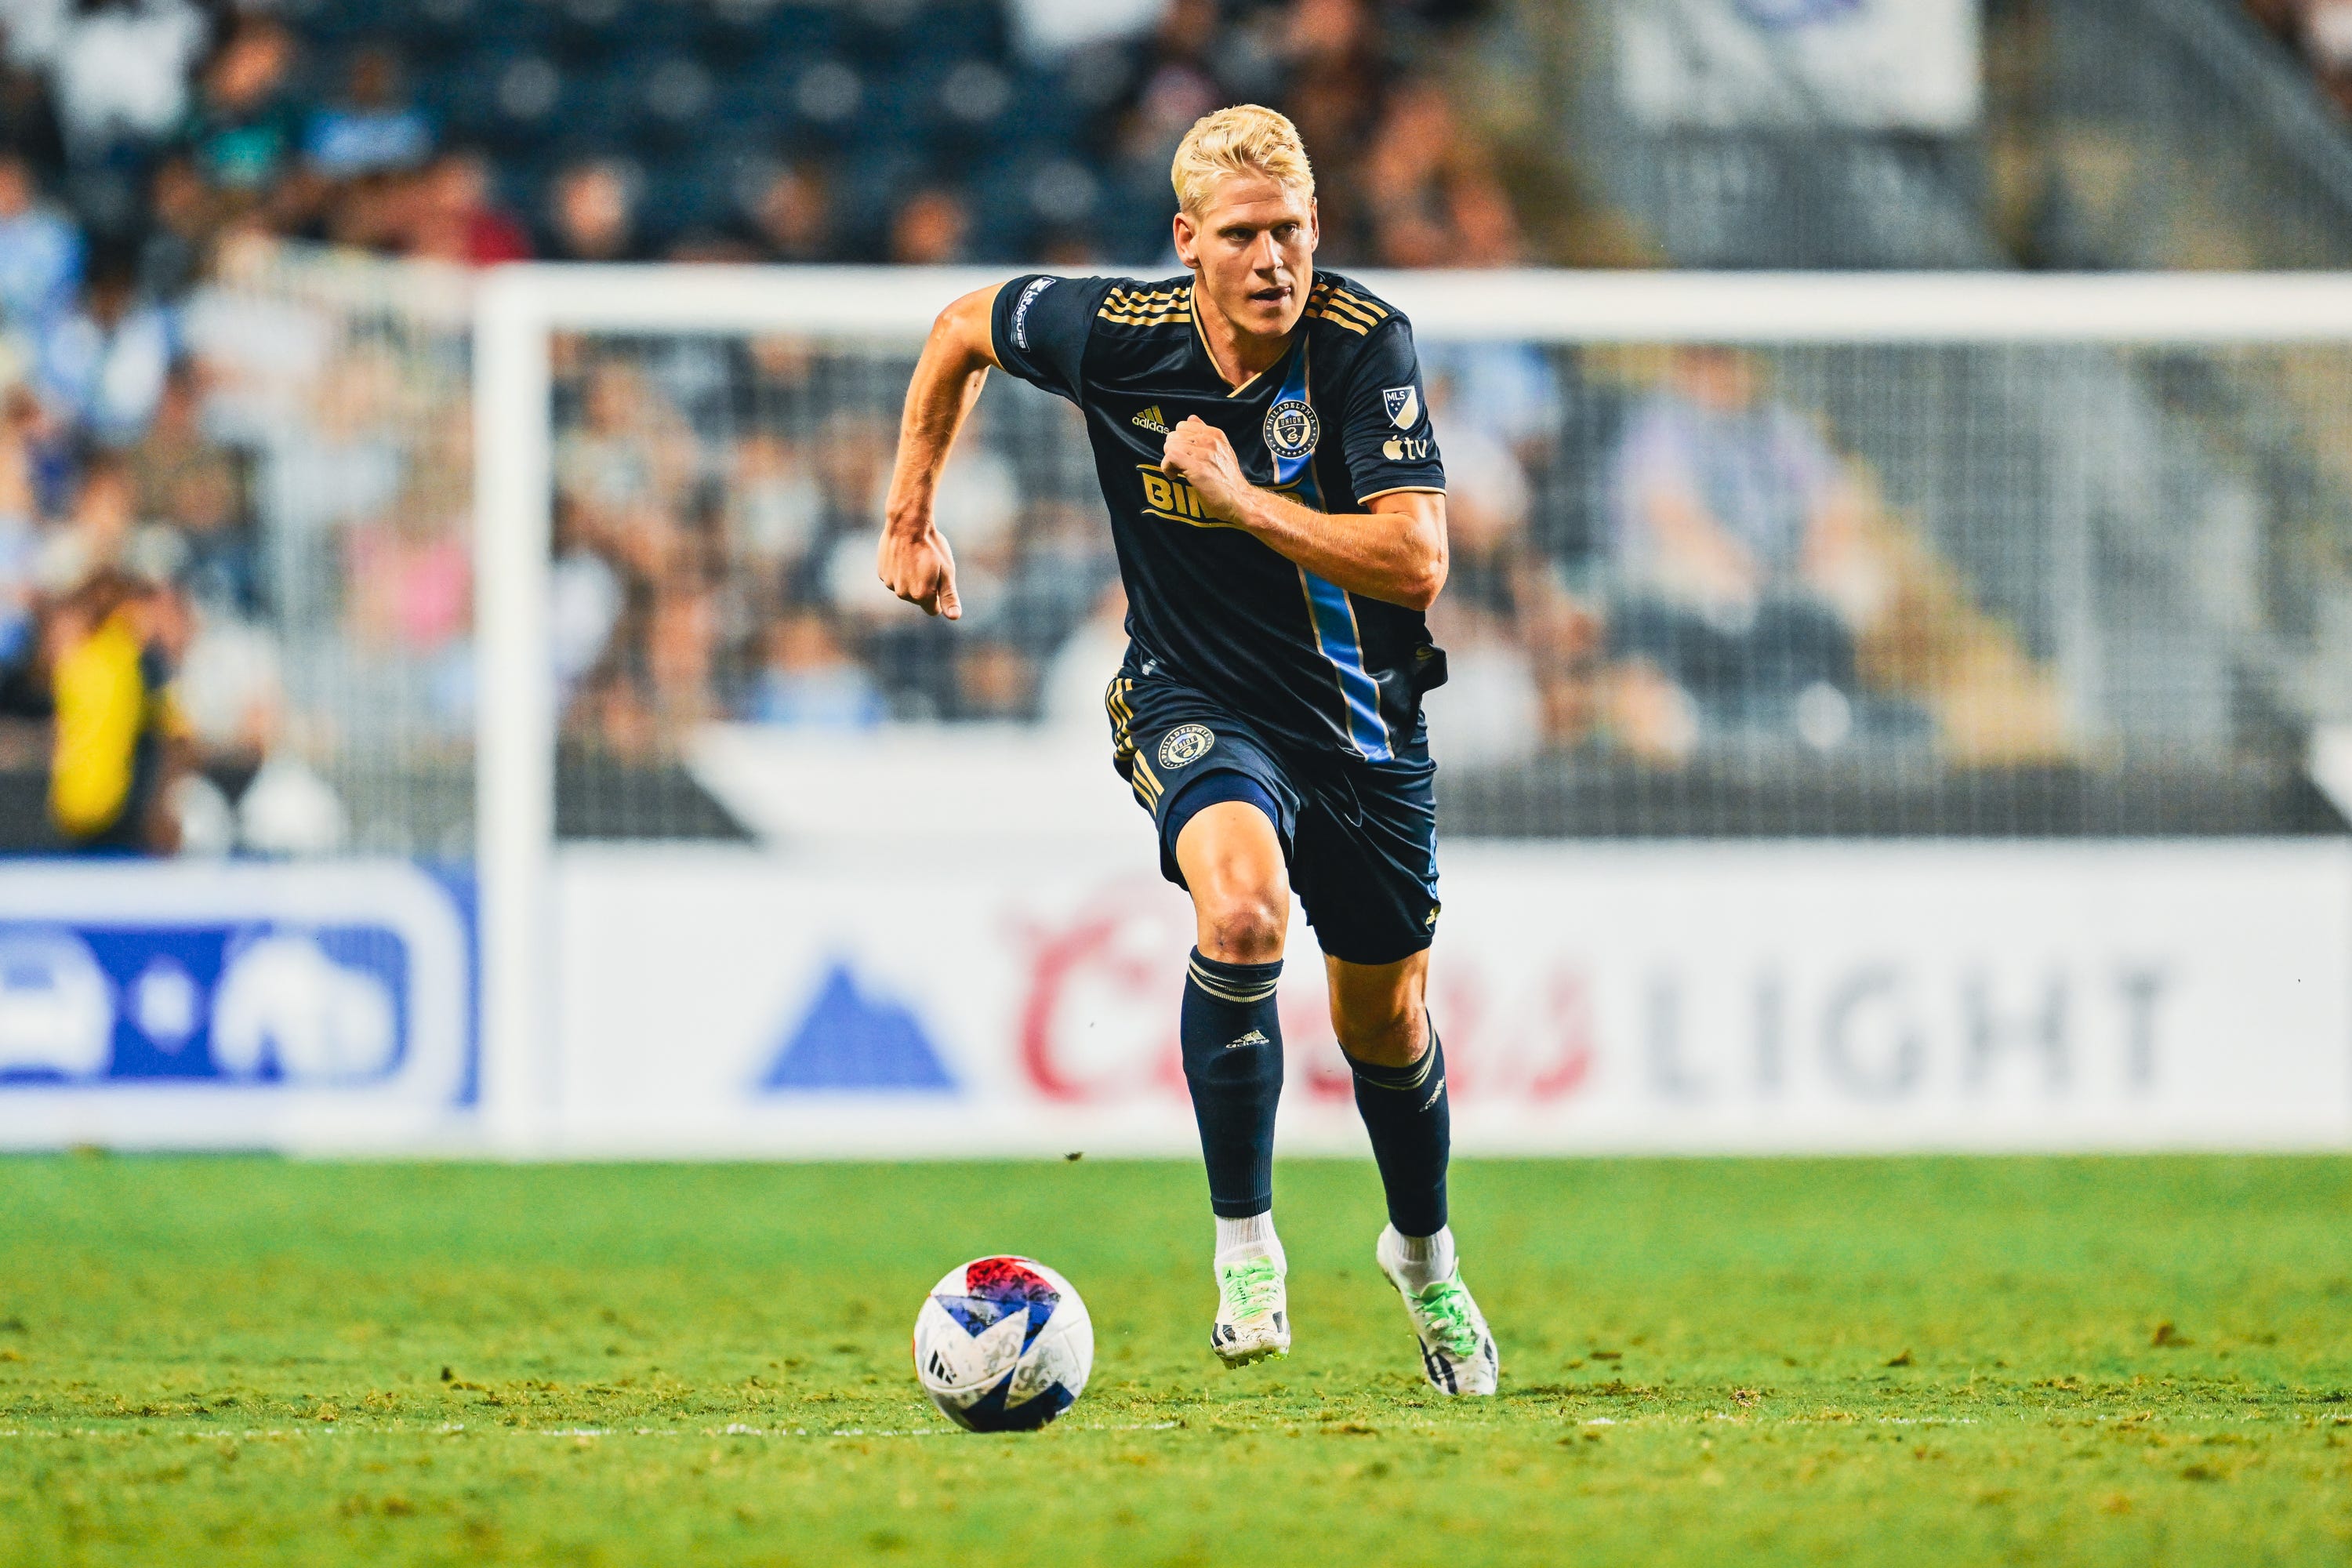 Joe Tansey on X: The Philadelphia Union have changed their badge